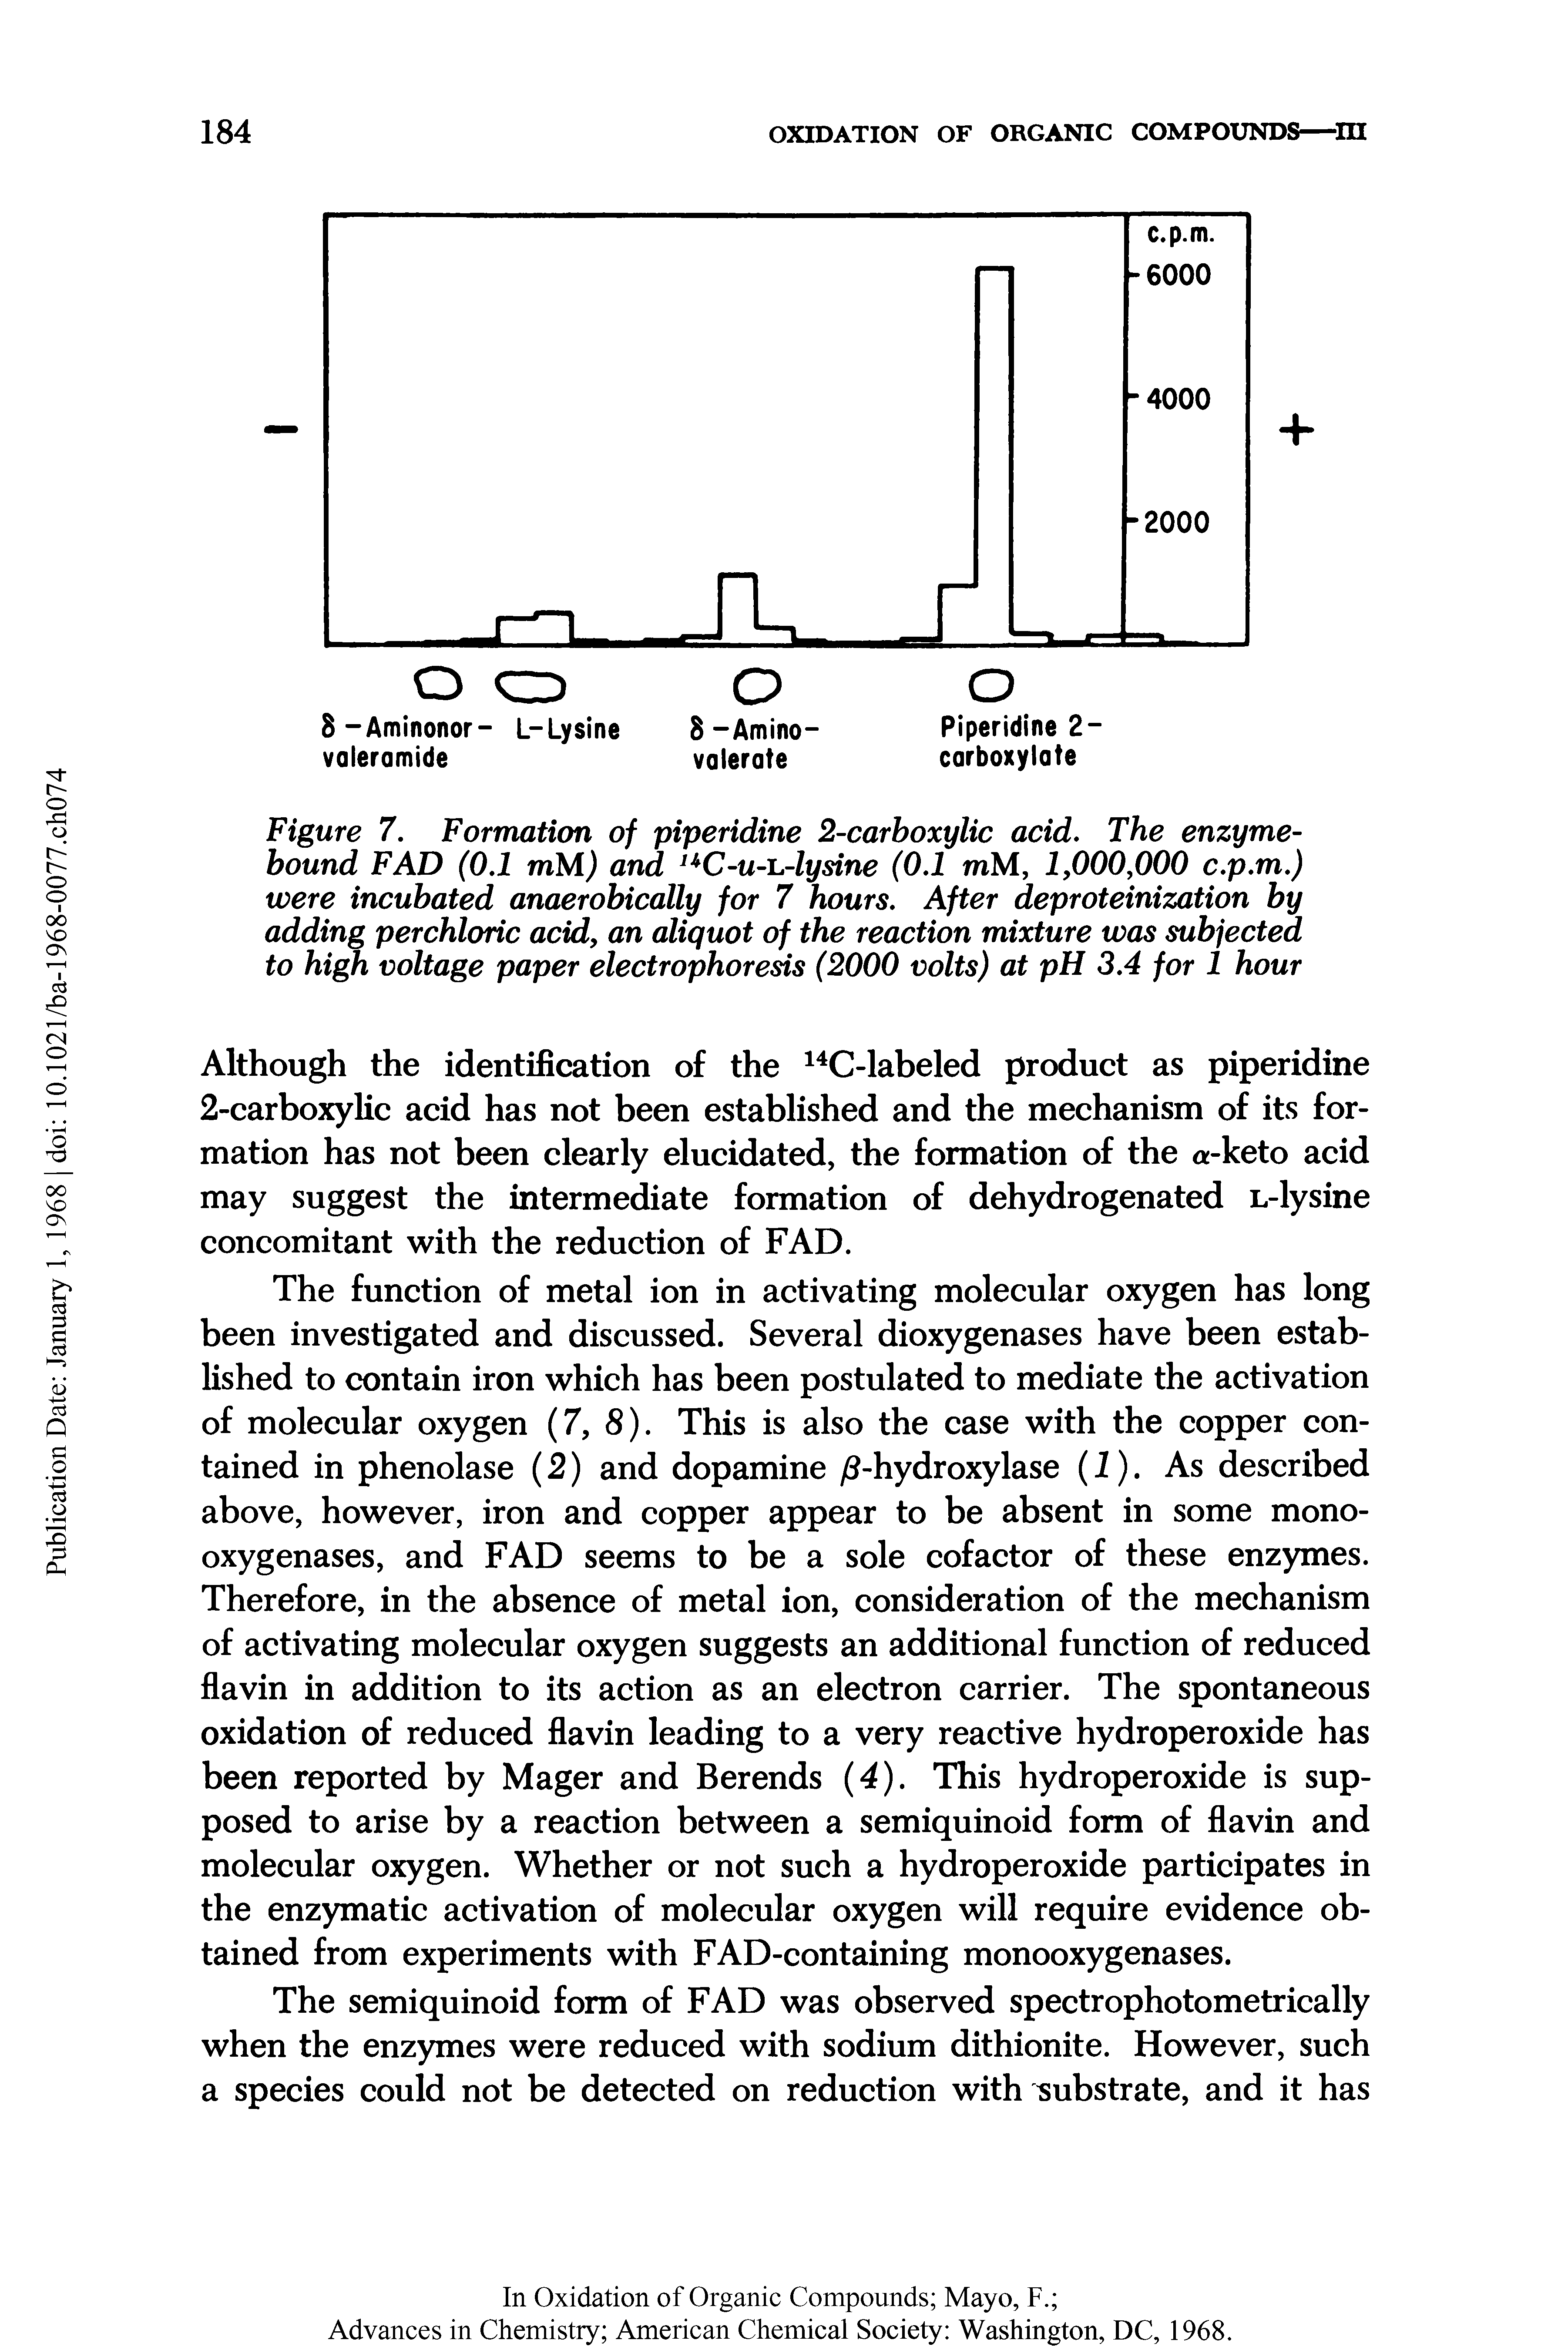 Figure 7. Formation of piperidine 2-carhoxylic acid. The enzyme-bound FAD (0.1 mM) and C-u-L.-lysine (0.1 mM, 1,000,000 c.p.m.) were incubated anaerobically for 7 hours. After deproteinization by adding perchloric acid, an aliquot of the reaction mixture was subjected to hi voltage paper electrophoresis (2000 volts) at pH 3.4 for 1 hour...